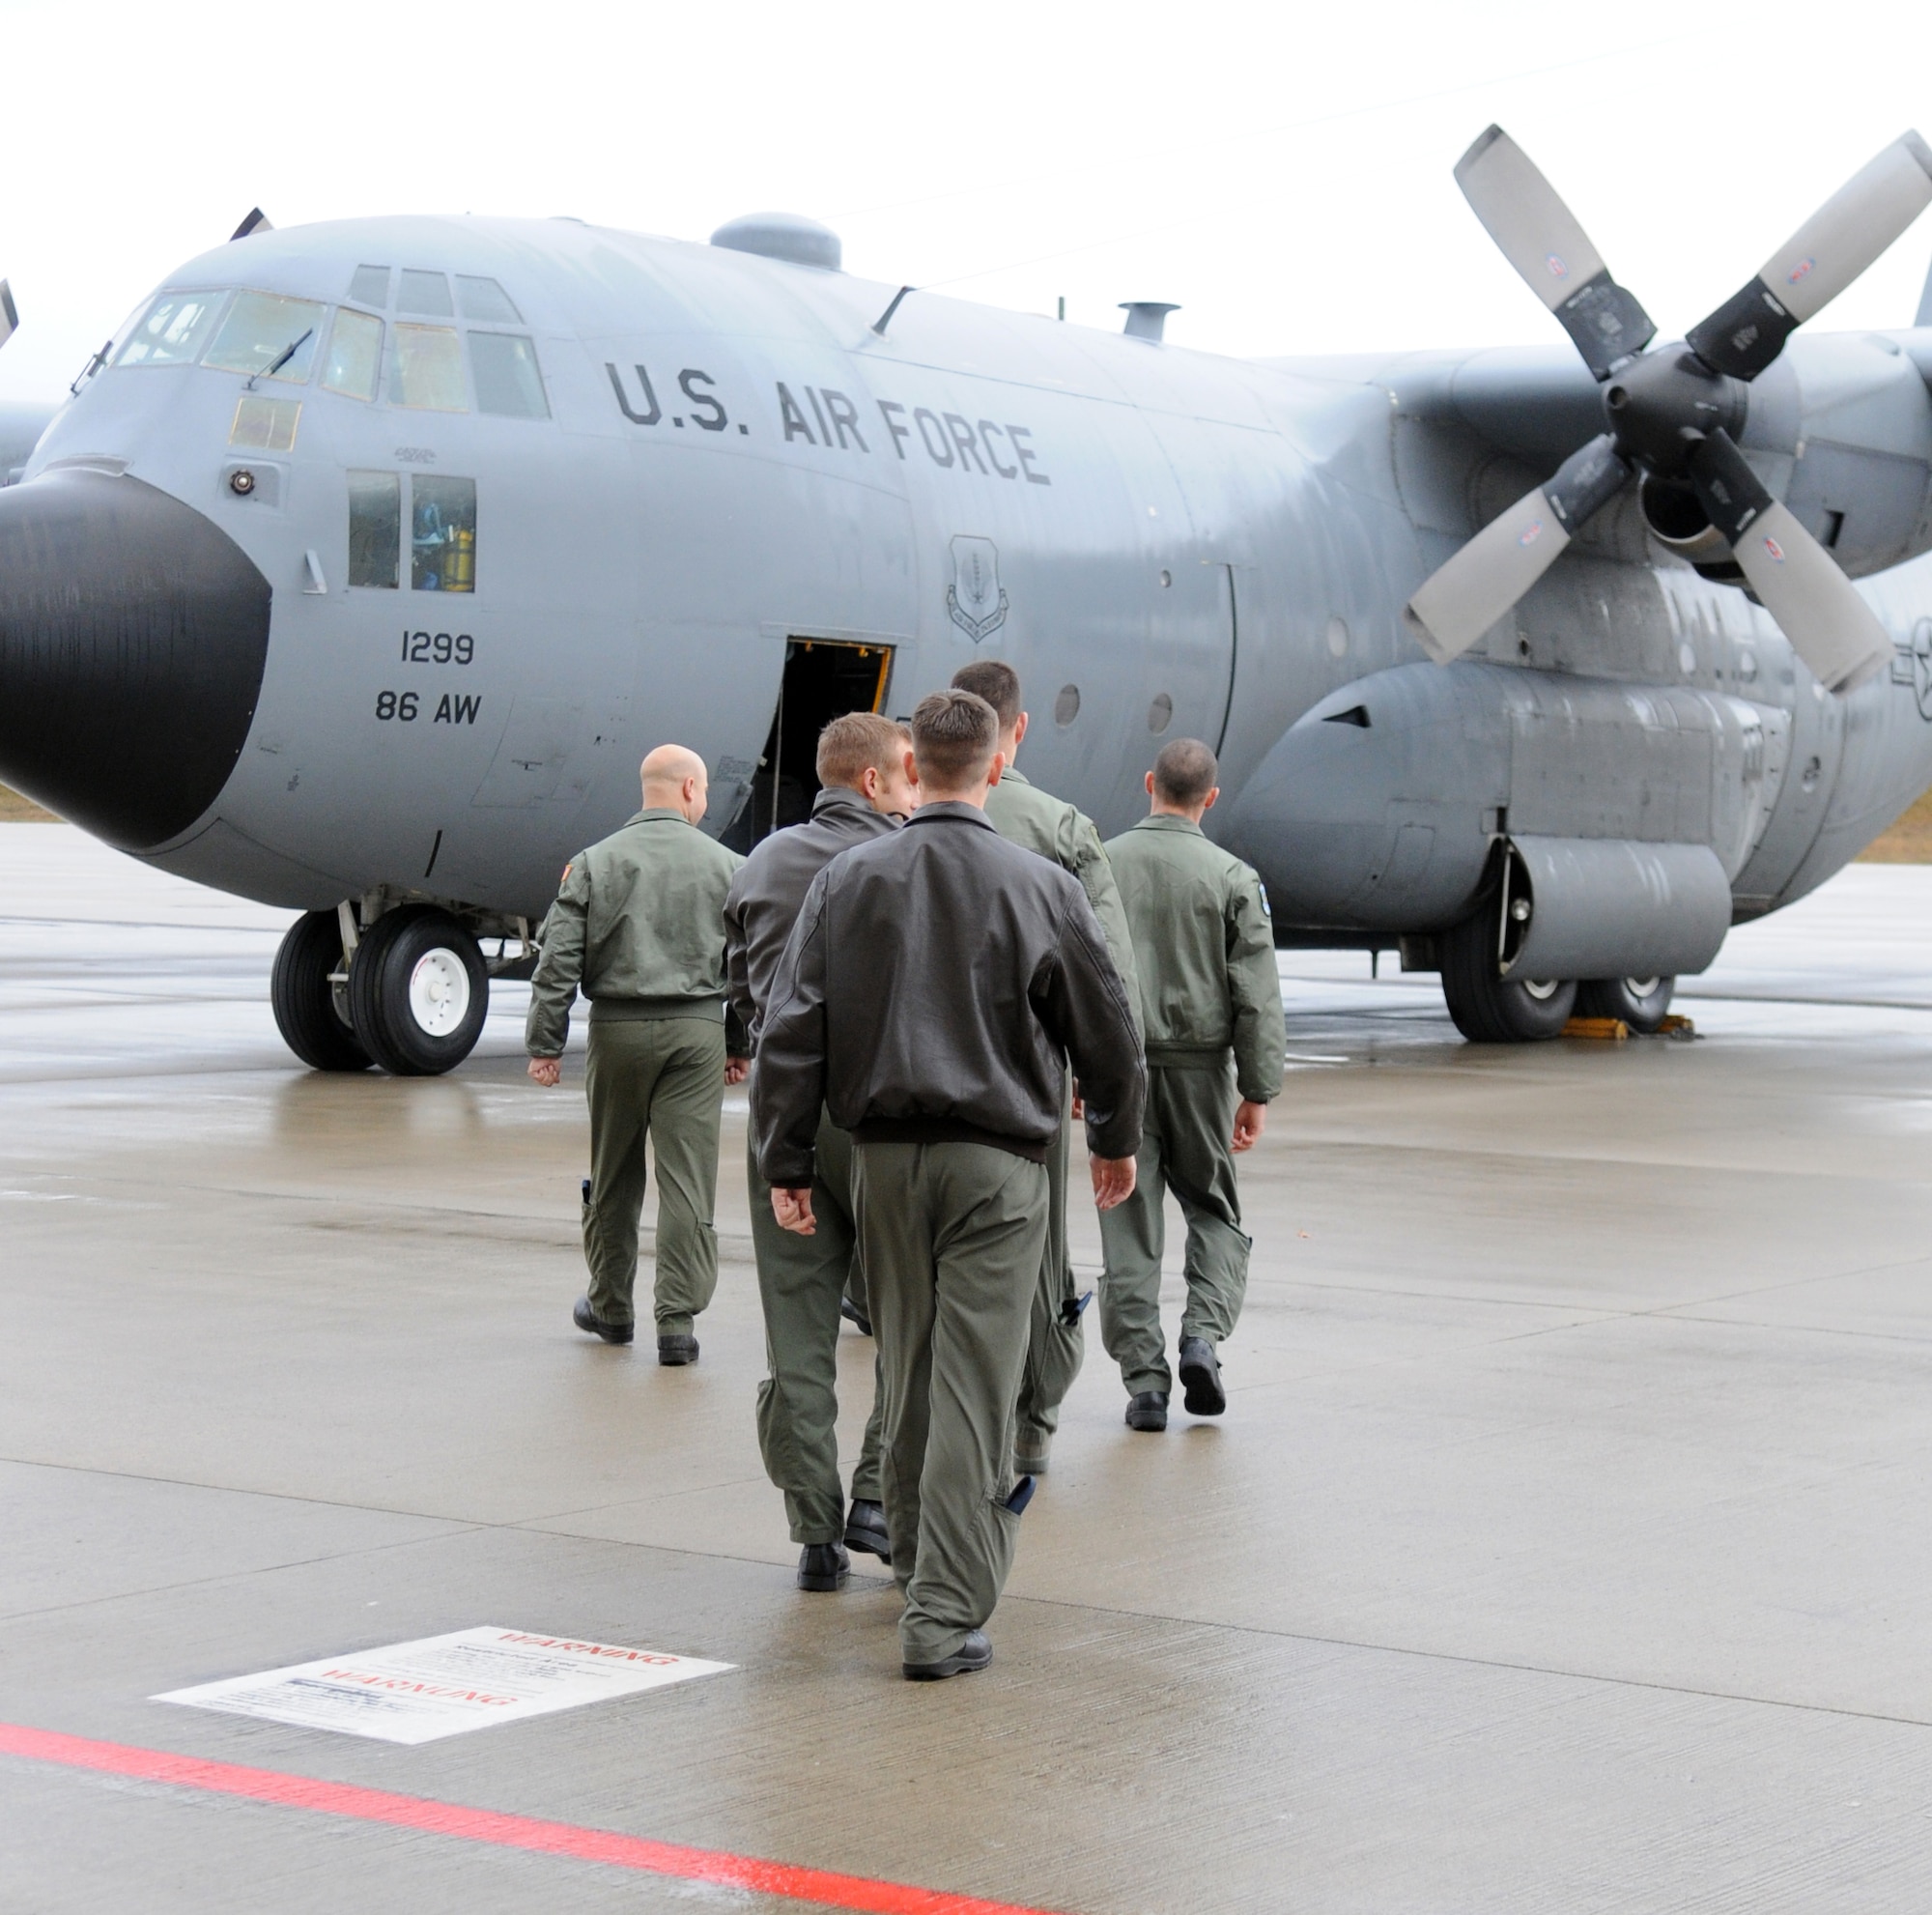 A U.S. Air Force flight crew boards Ramstein's last C-130E Hercules in preparation for final departure on Ramstein Air Base, Germany, Nov., 2, 2009. The C-130E Hercules has provided more than 40 years of airpower to U.S.  Air Forces in Europe, and is being replaced with the new C-130J Super Hercules as part of the revitalization of the Air Force fleet. (U.S. Air Force photo by Airman 1st Class Caleb Pierce)